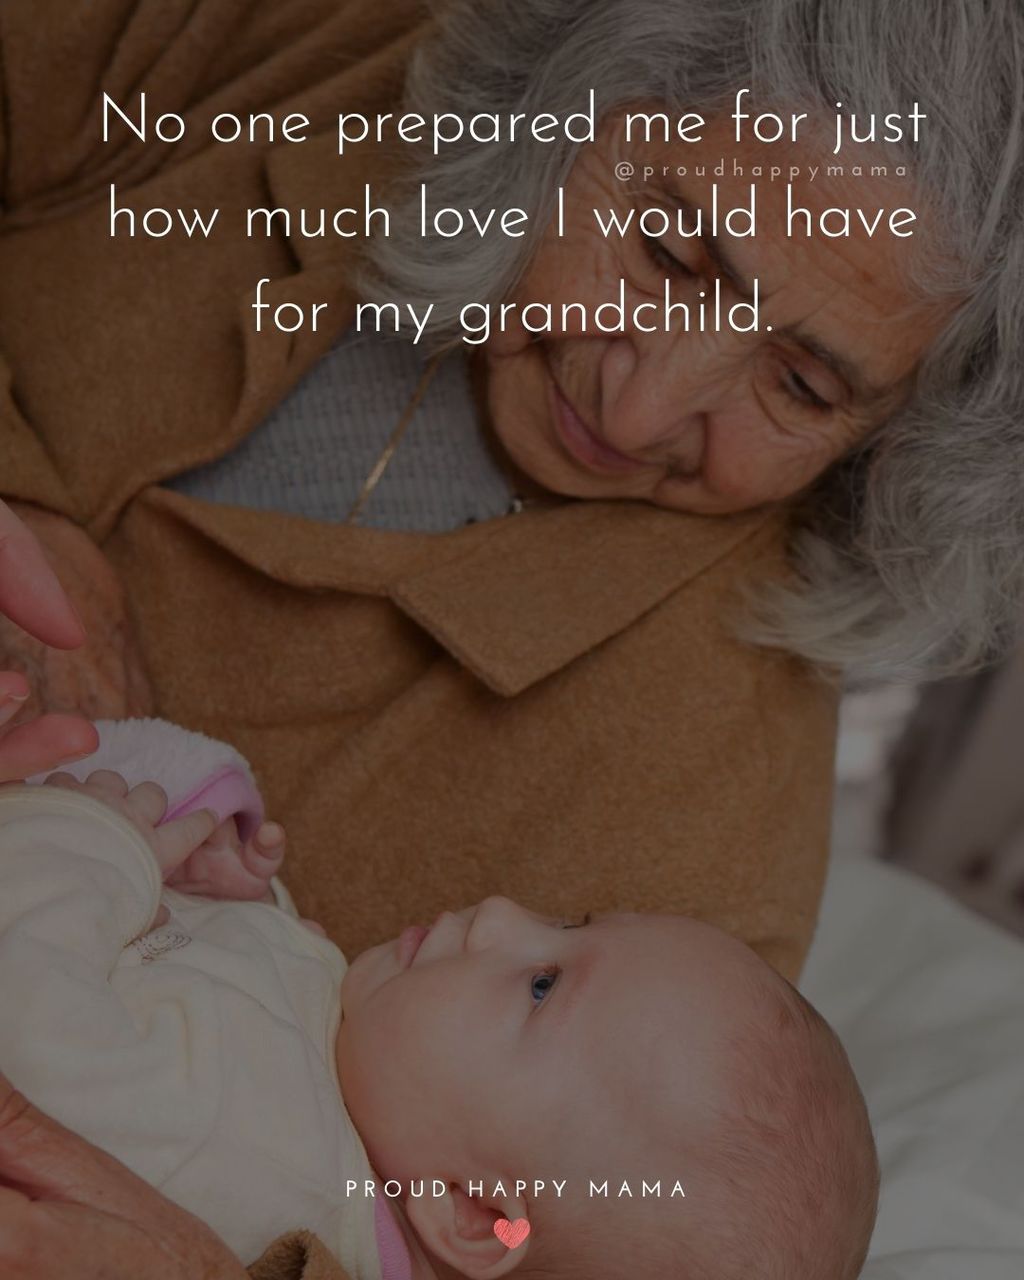 Quotes for Grandchildren - No one prepared me for just how much love I would have for my grandchild.